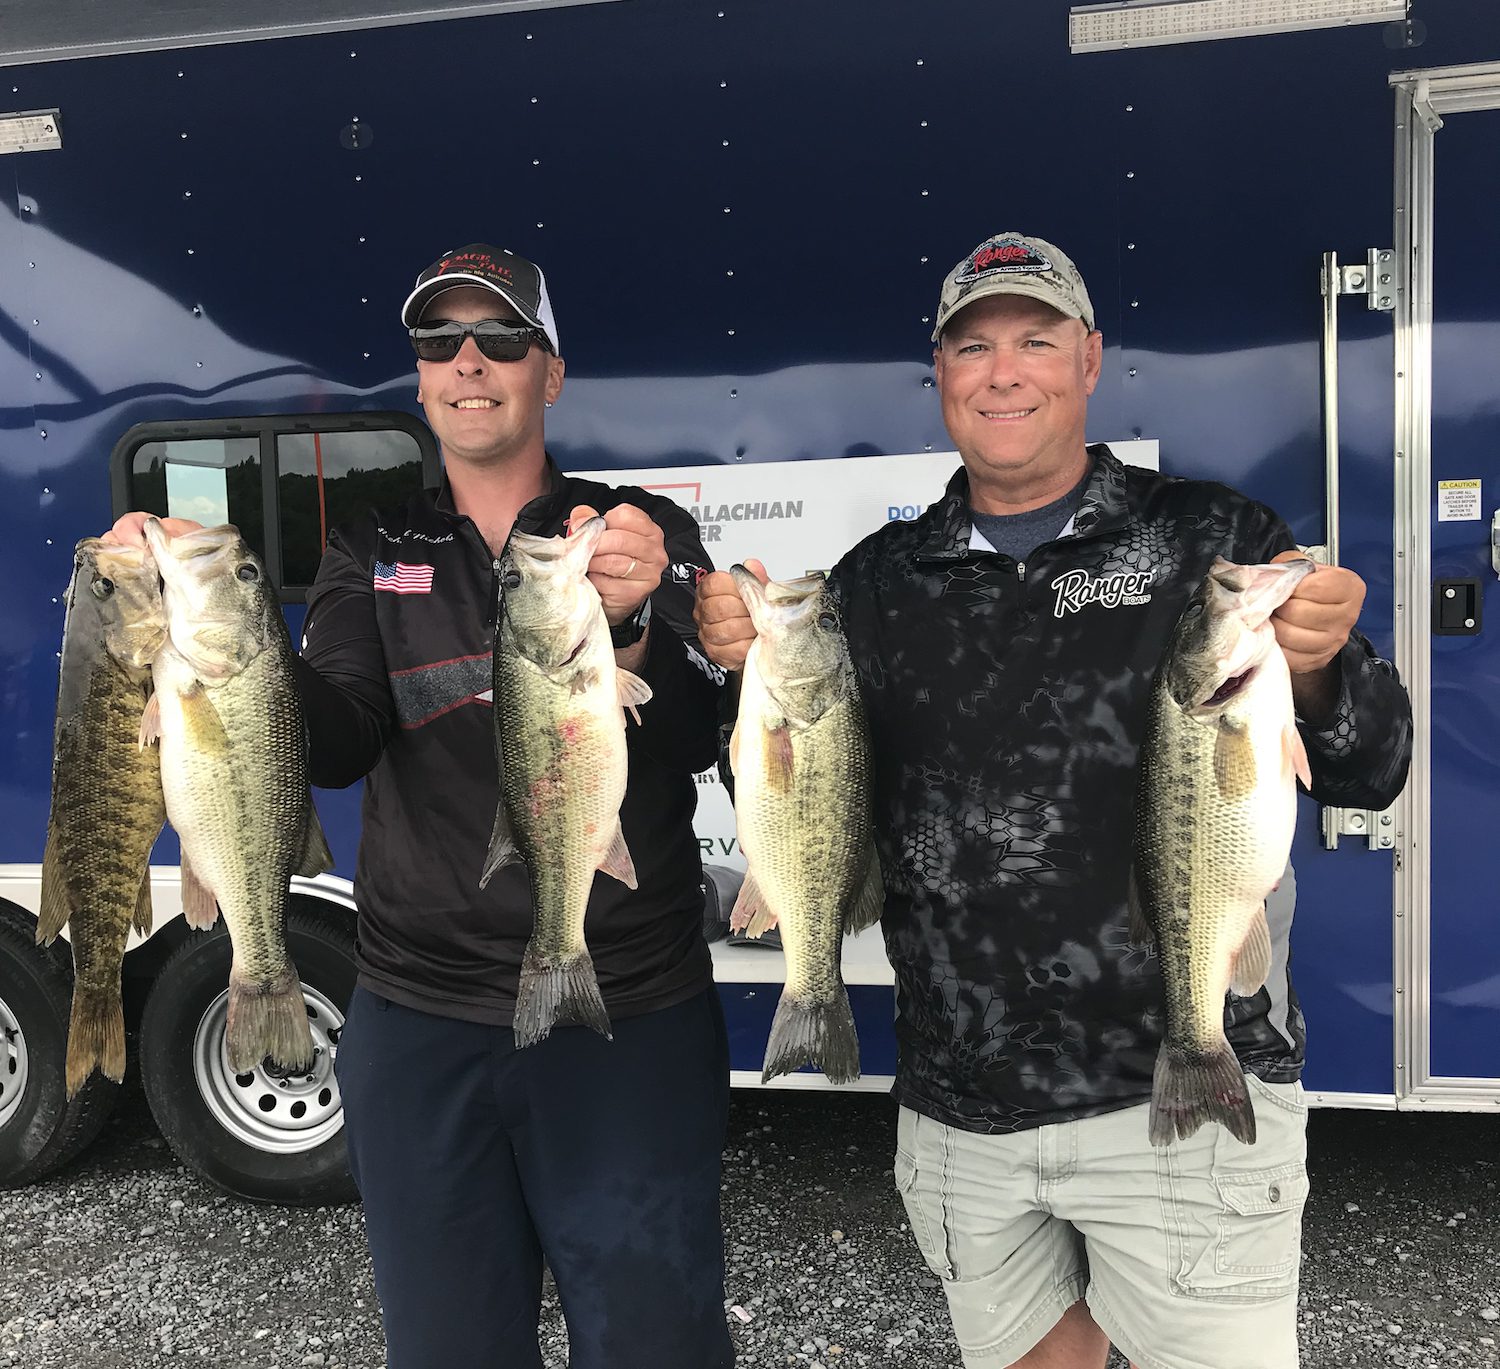 Mike & Michael Nichols Win Dollar Energy Fund (Fishing for a Cause) SML May 5th 2019